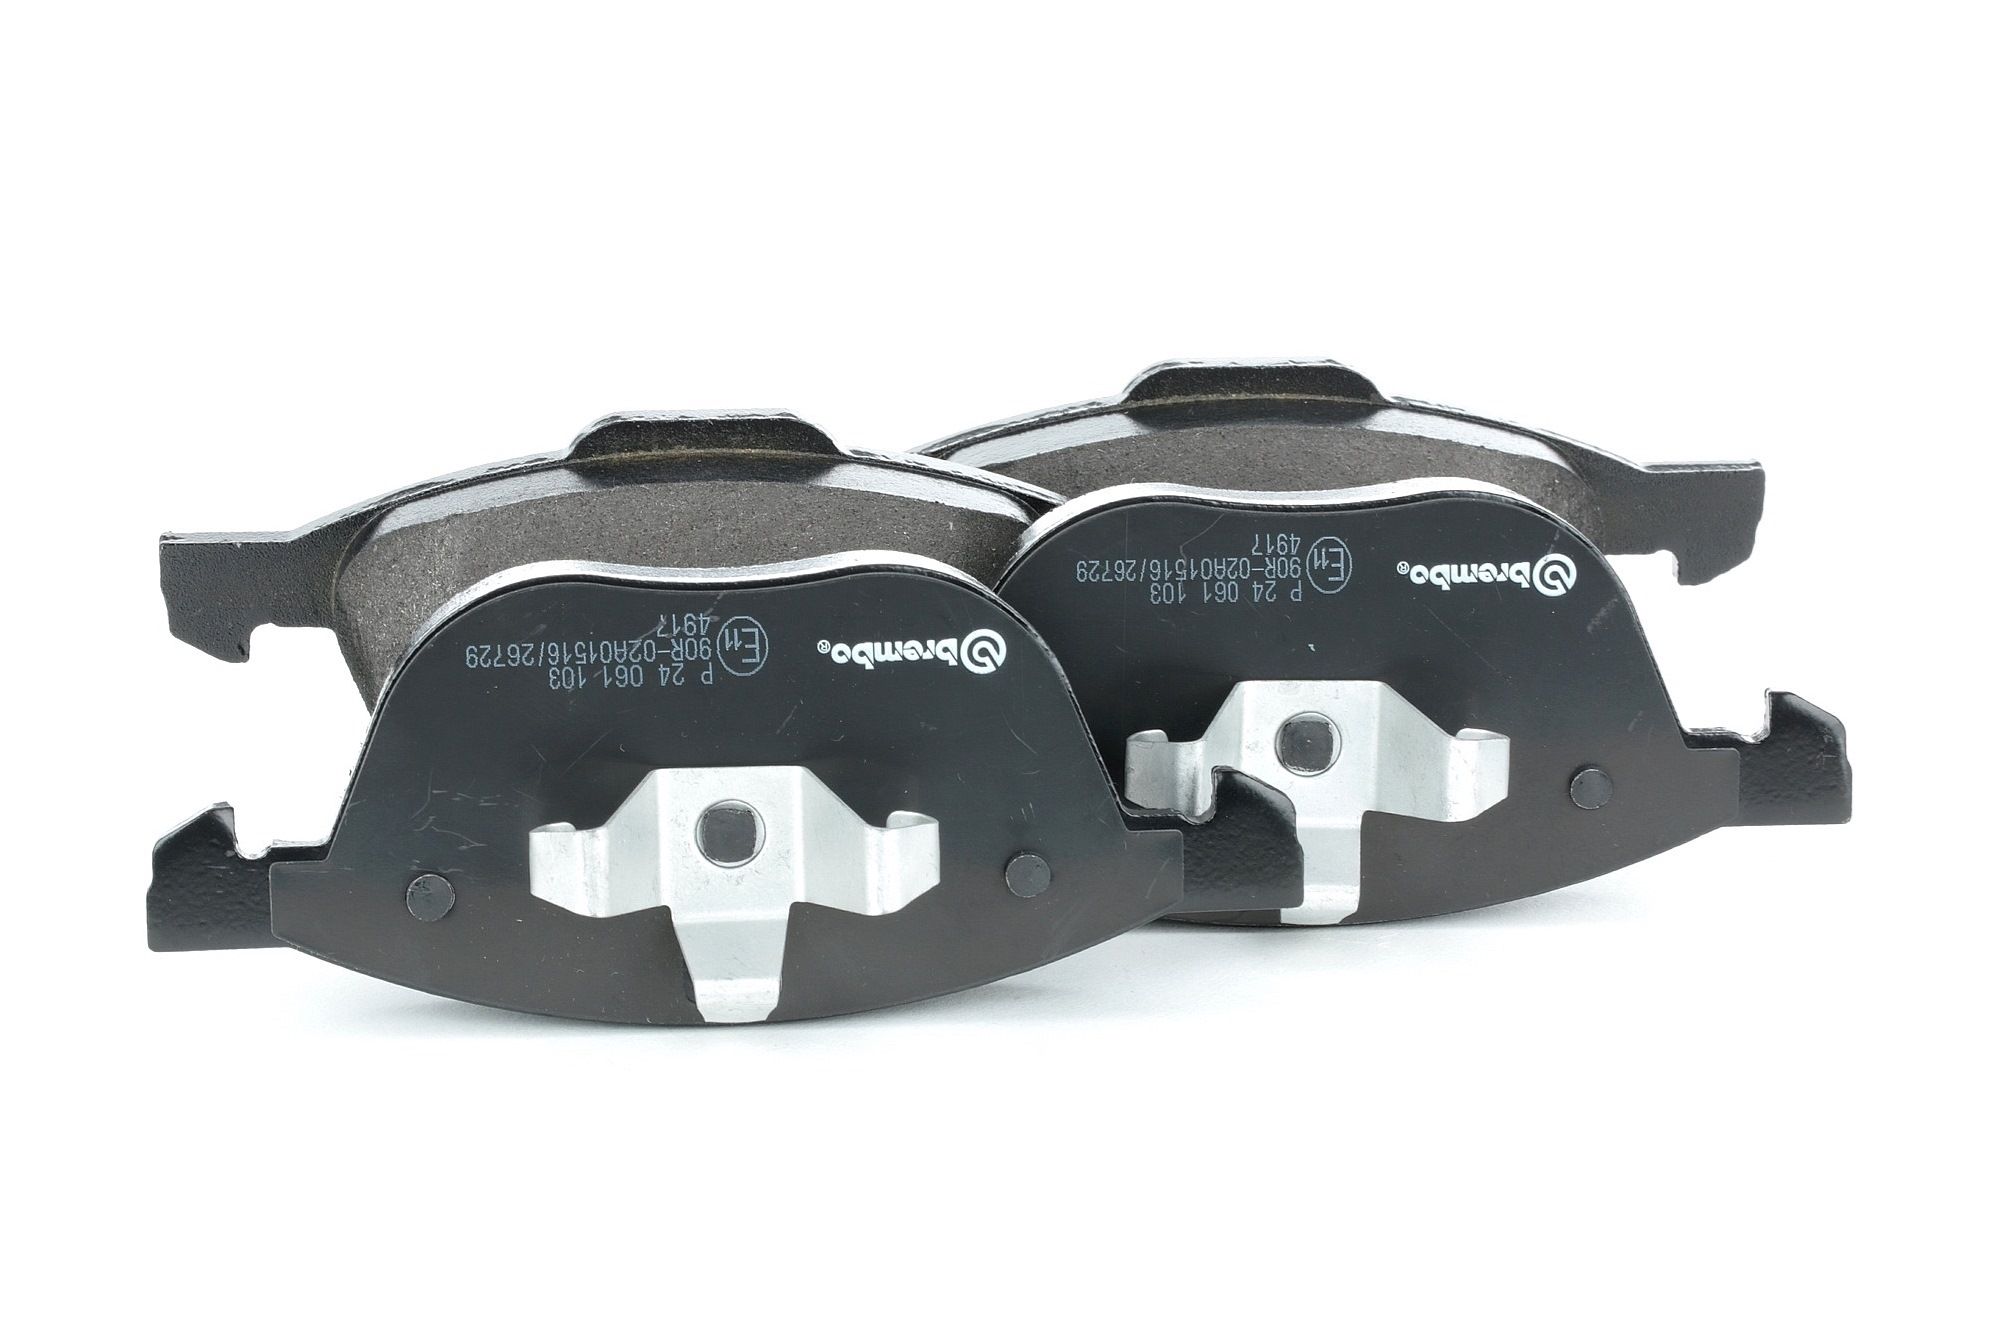 Buy Disk pads BREMBO P 24 061 Height 1: 62mm, Height 2: 67mm, Width 1: 155mm, Width 2 [mm]: 156mm, Thickness: 18mm